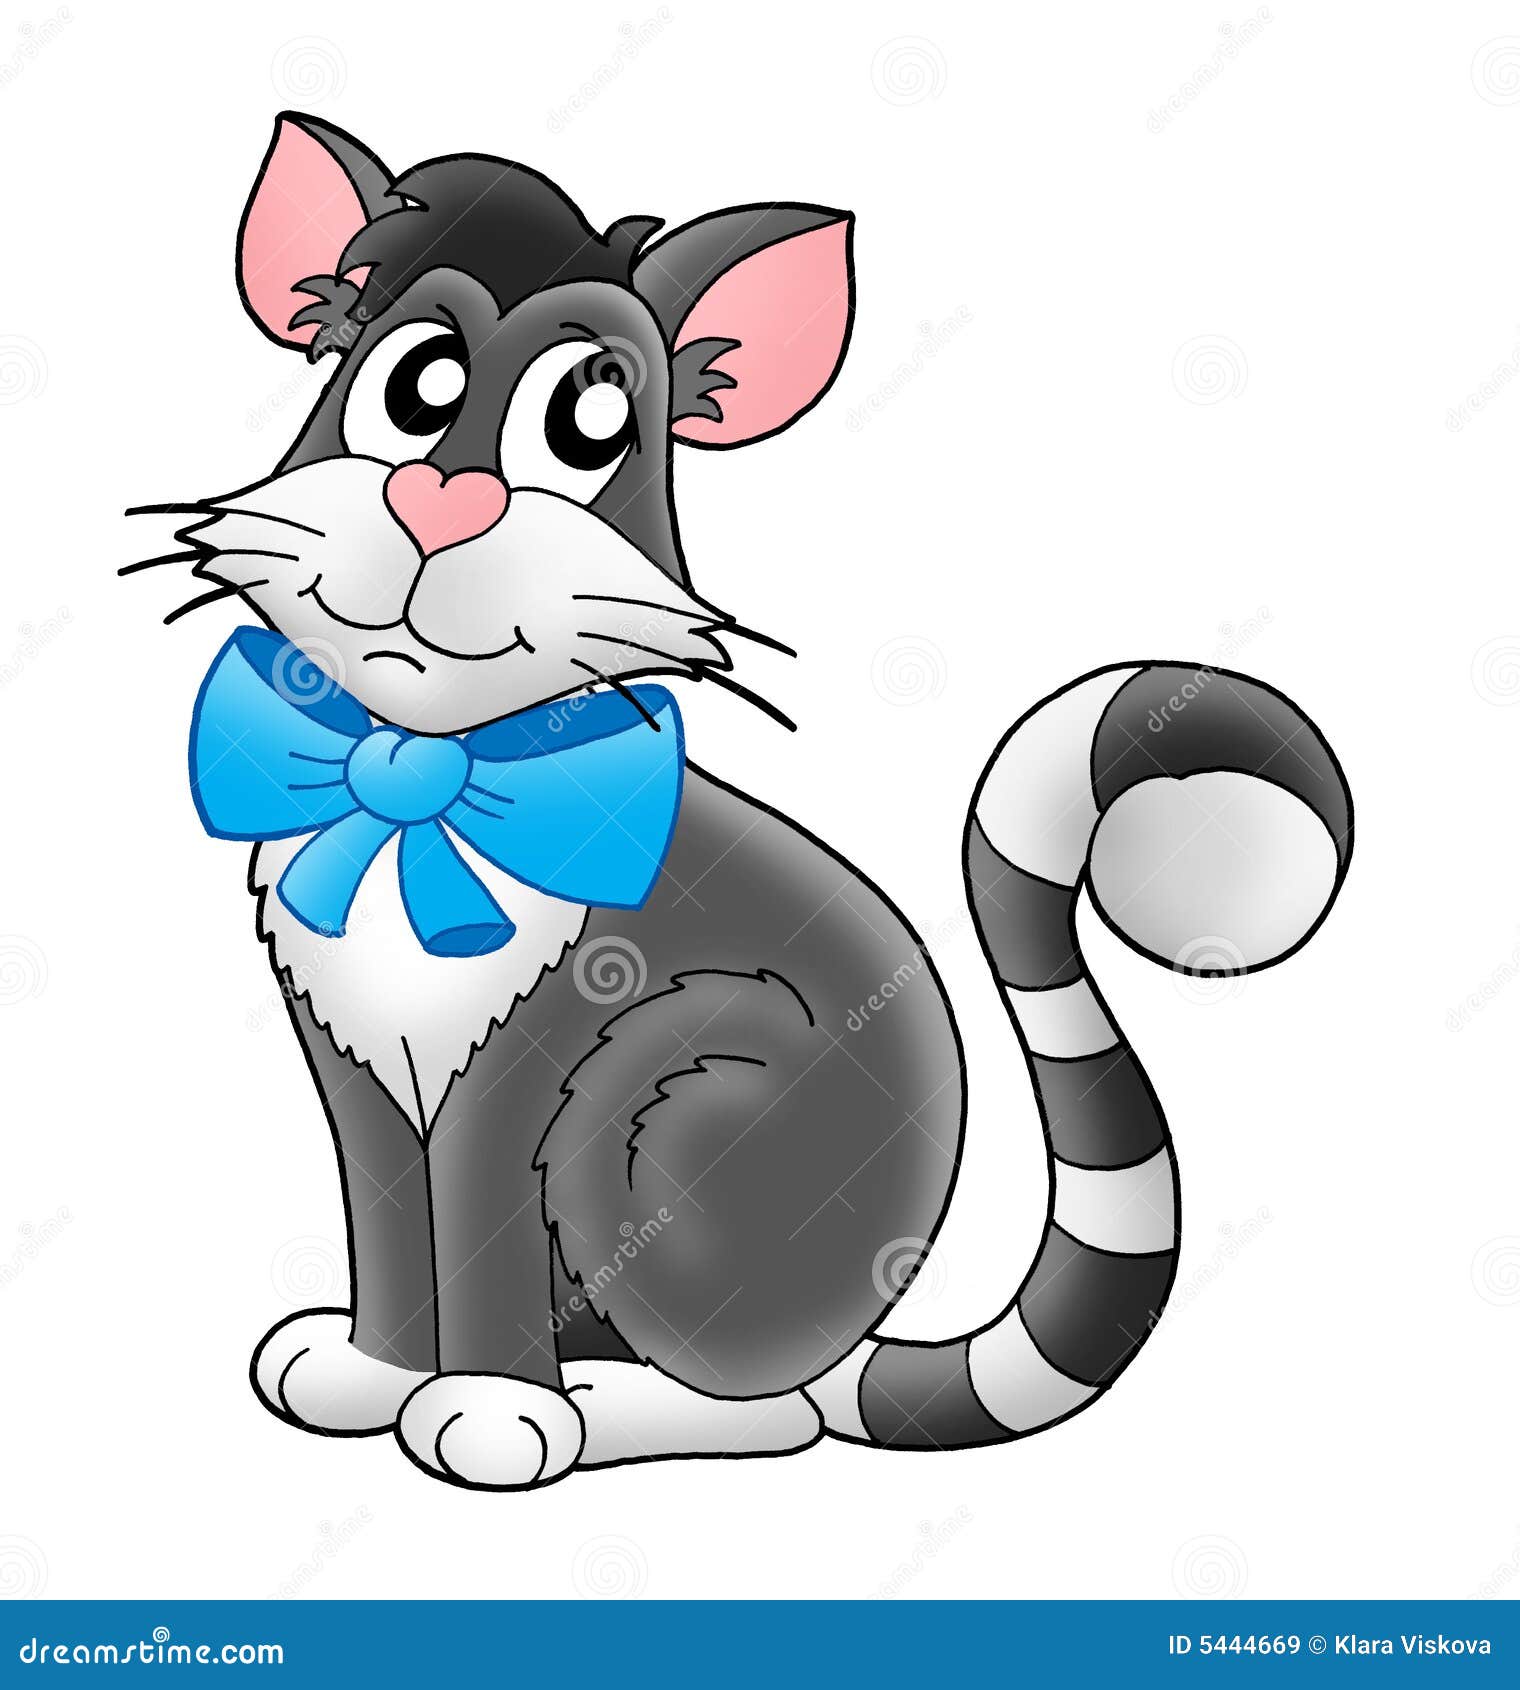 Cat With Blue Ribbon Royalty Free Stock Images - Image: 5444669